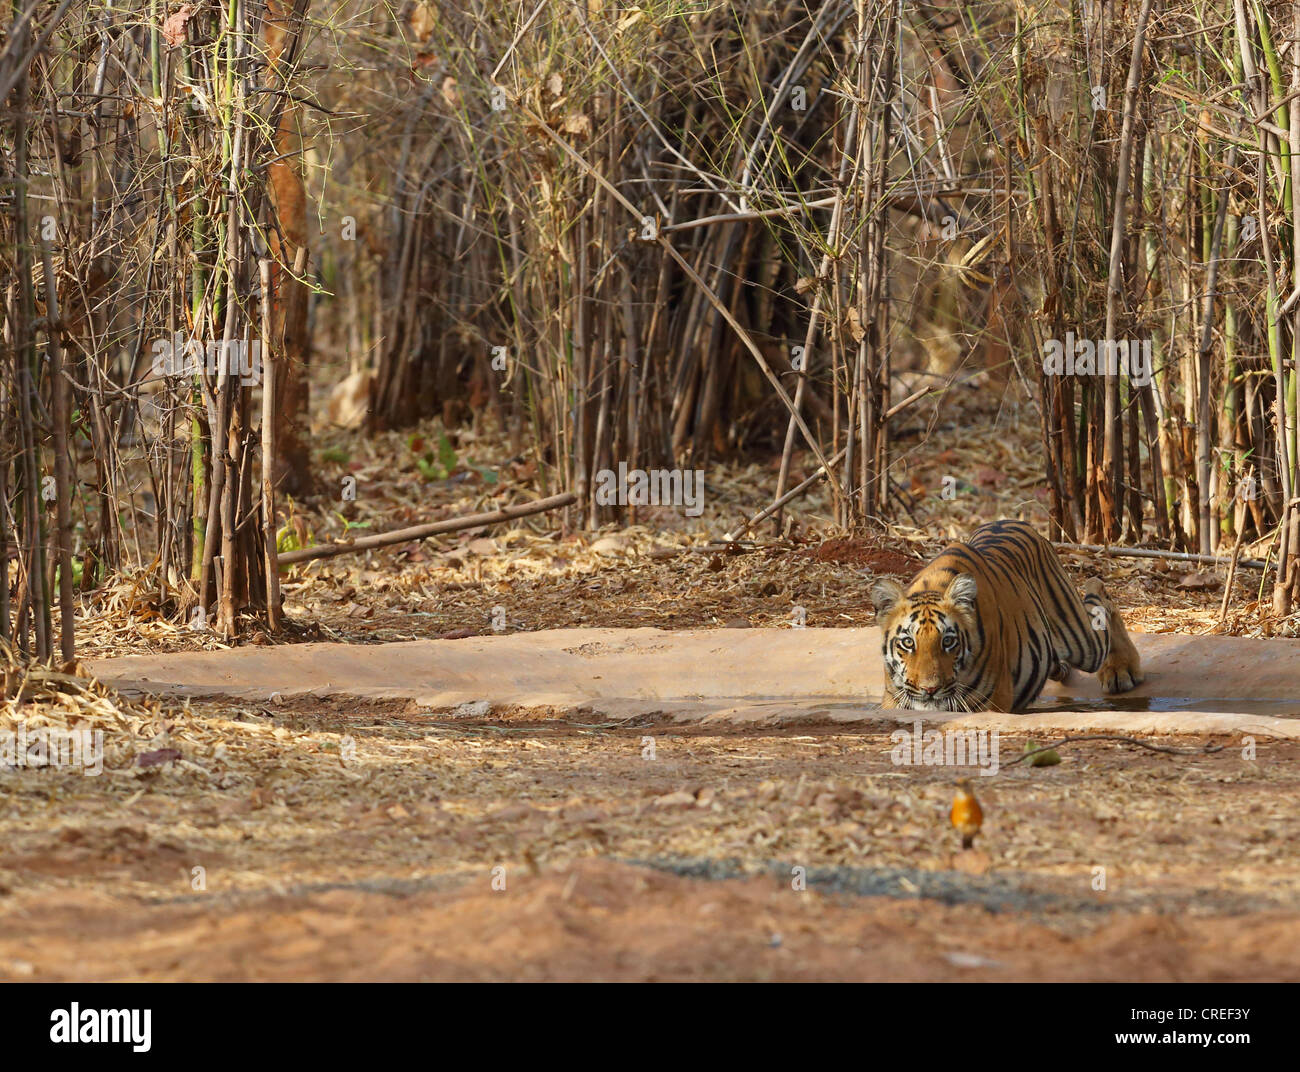 Tiger cub cooling off in waterhole and staring at photographer in Tadoba jungle, India. Stock Photo